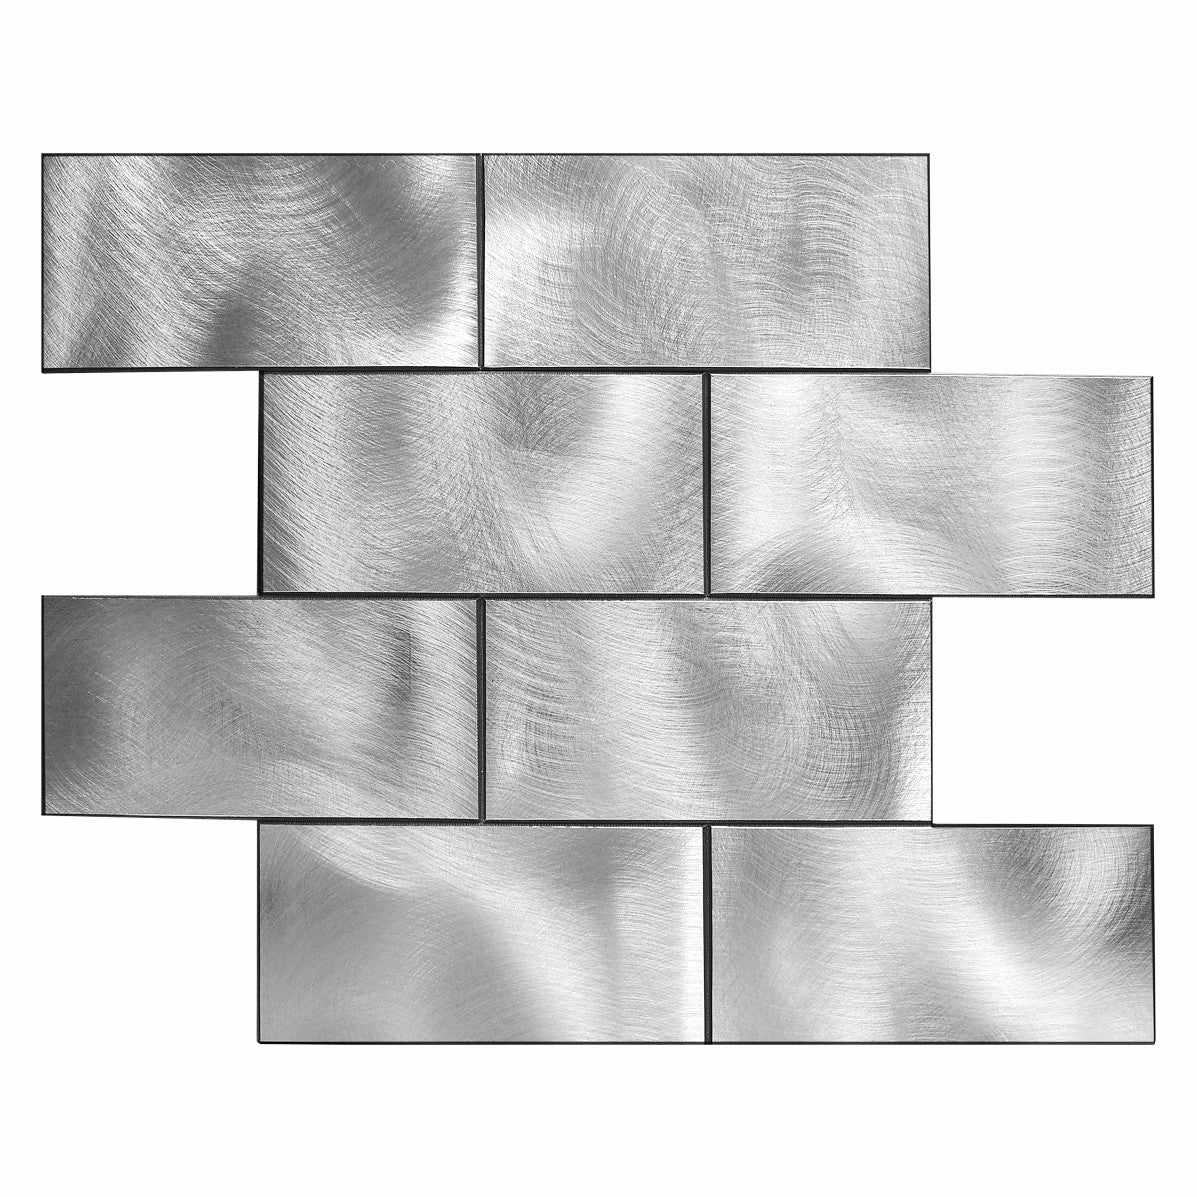 Decopsu Metal Subway Tile Backsplash Peel and Stick (Retangle Silver, Rotary Abrased 5pc/Pack) for Kitchen Bathroom Wall Accent 15in x 12in 1.6in Thick, Self Adhesive Metal Tile